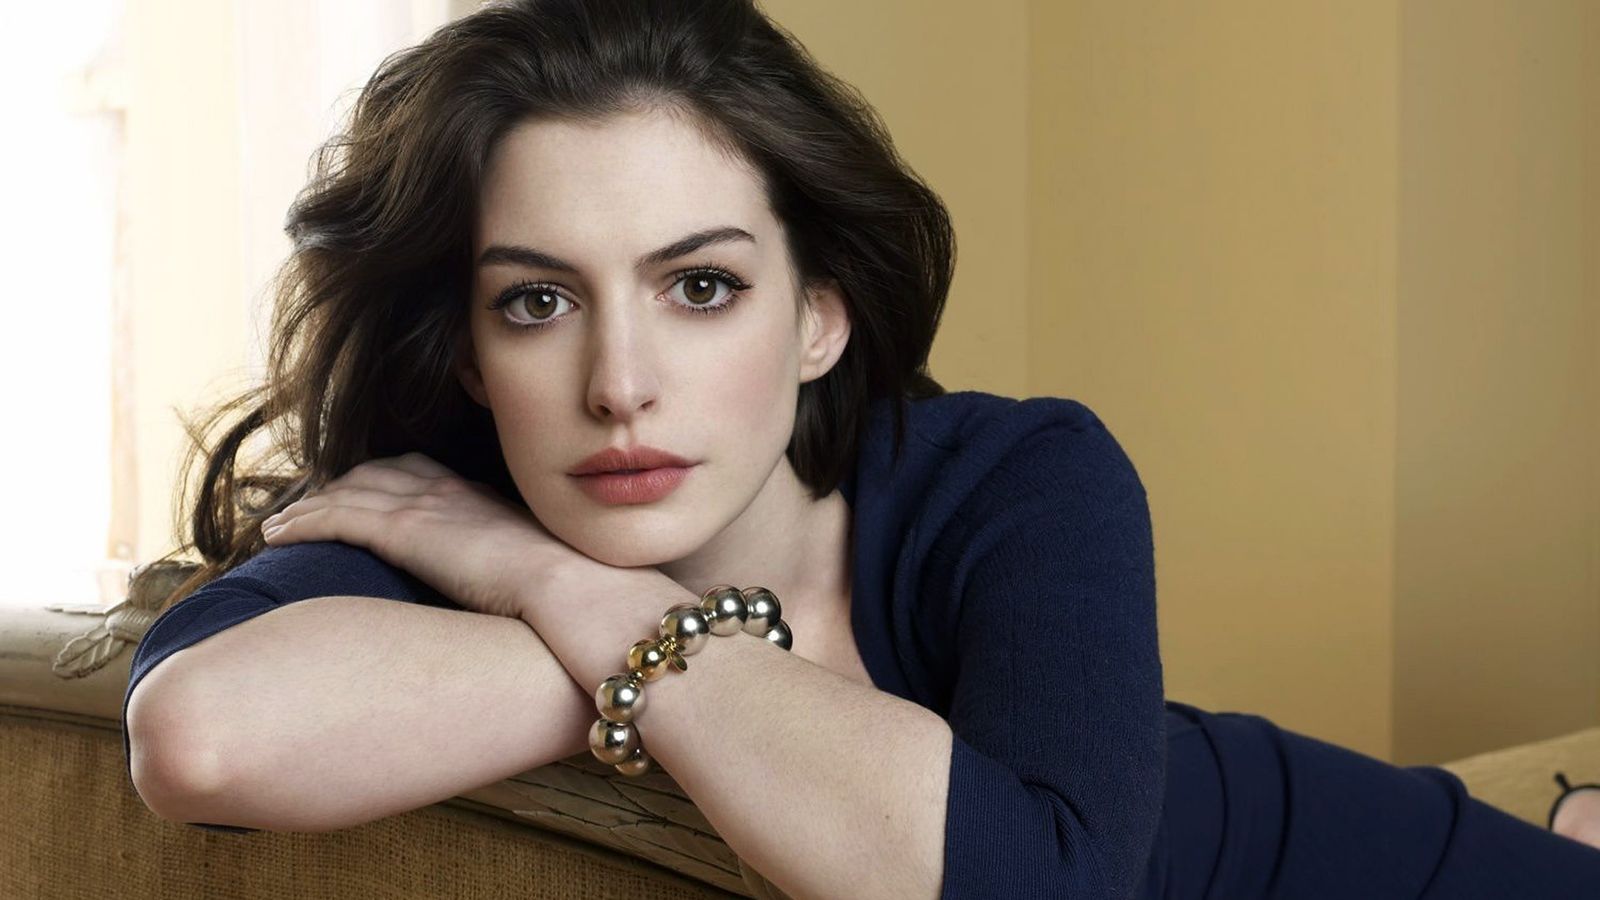 Read On To Find Out The Awkward Moment Anne Hathaway Experienced With Her Son